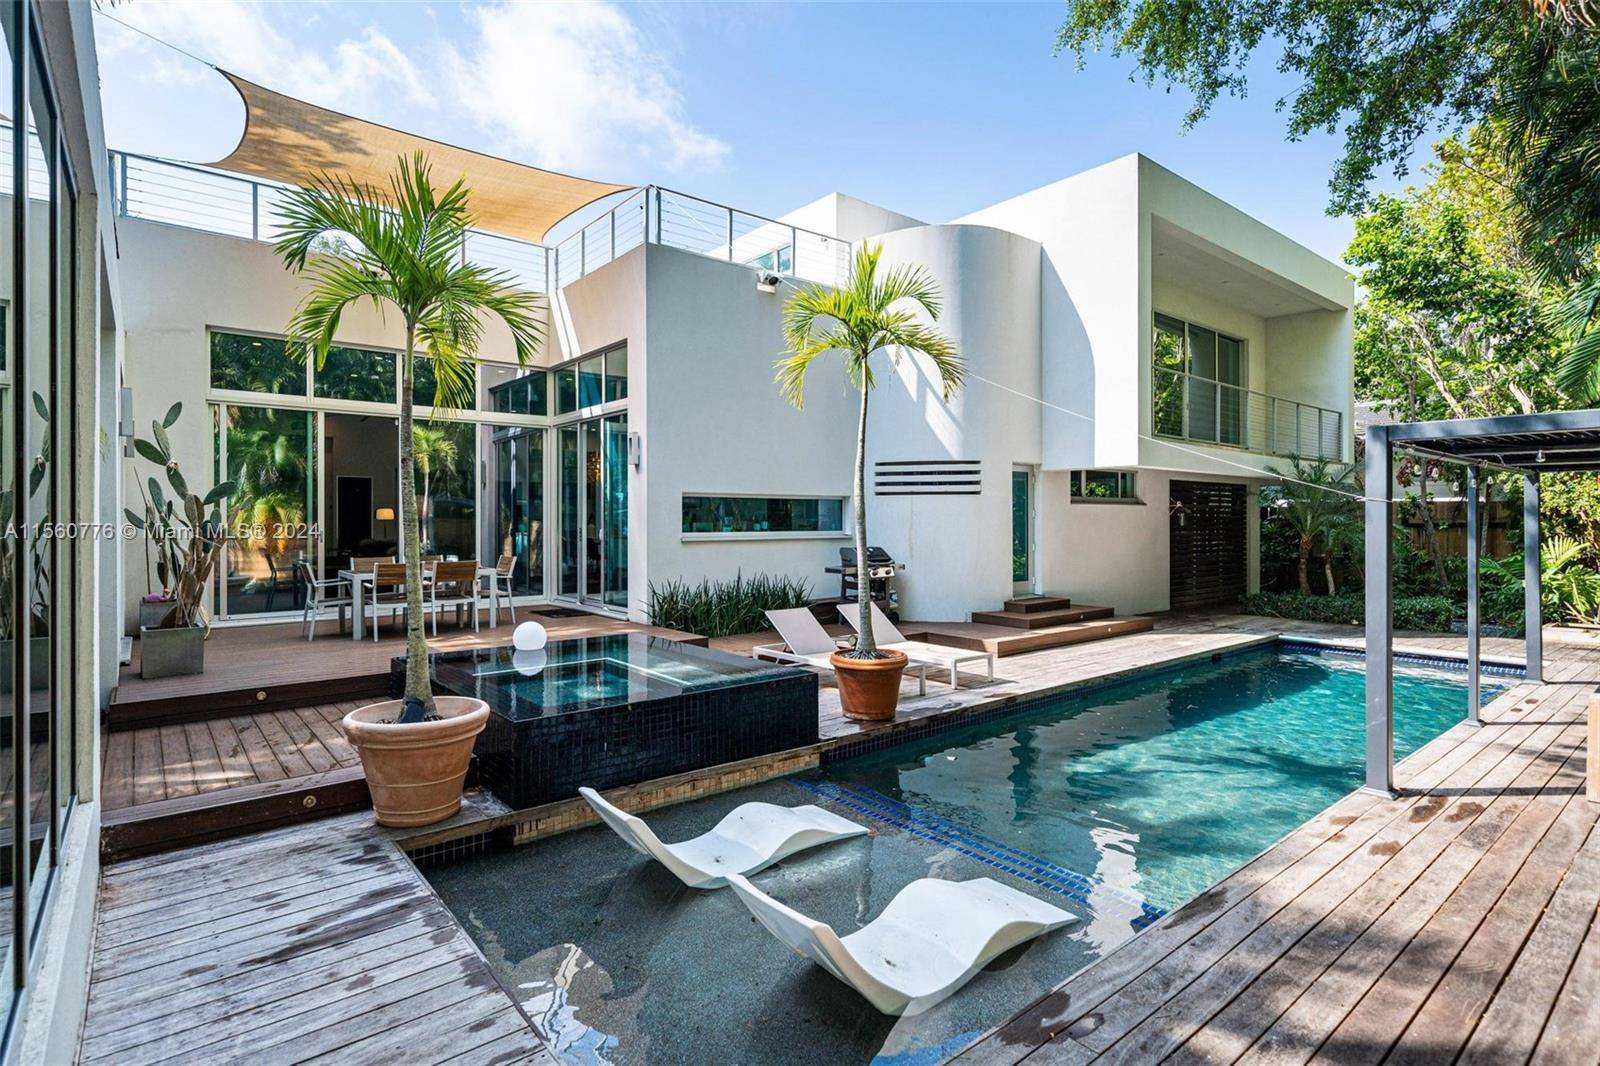 Discover this ultra chic, gated contemporary gem in the sought after Grove area.